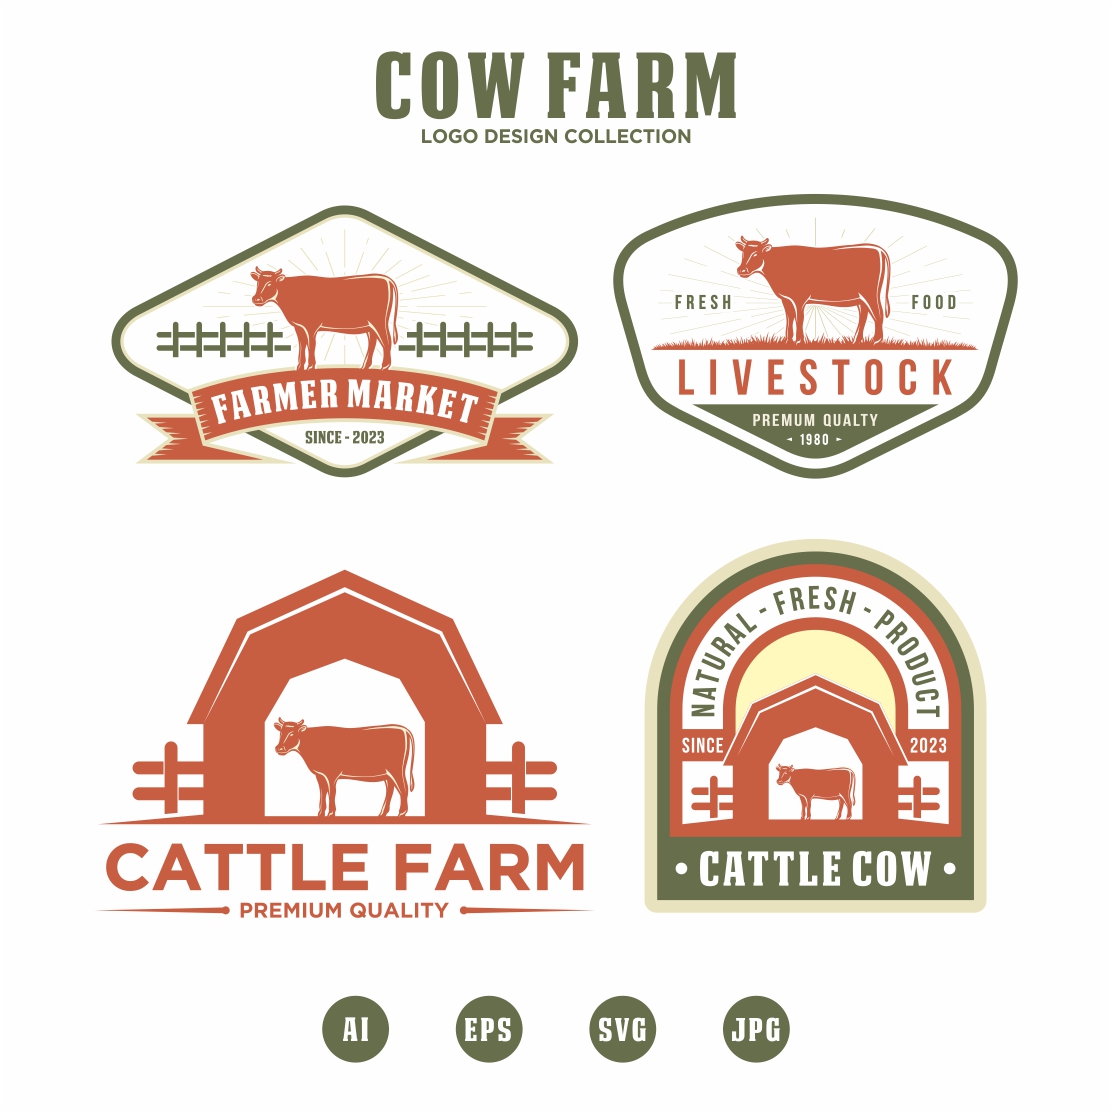 Cattle Farm logo design collection - only 10$ cover image.